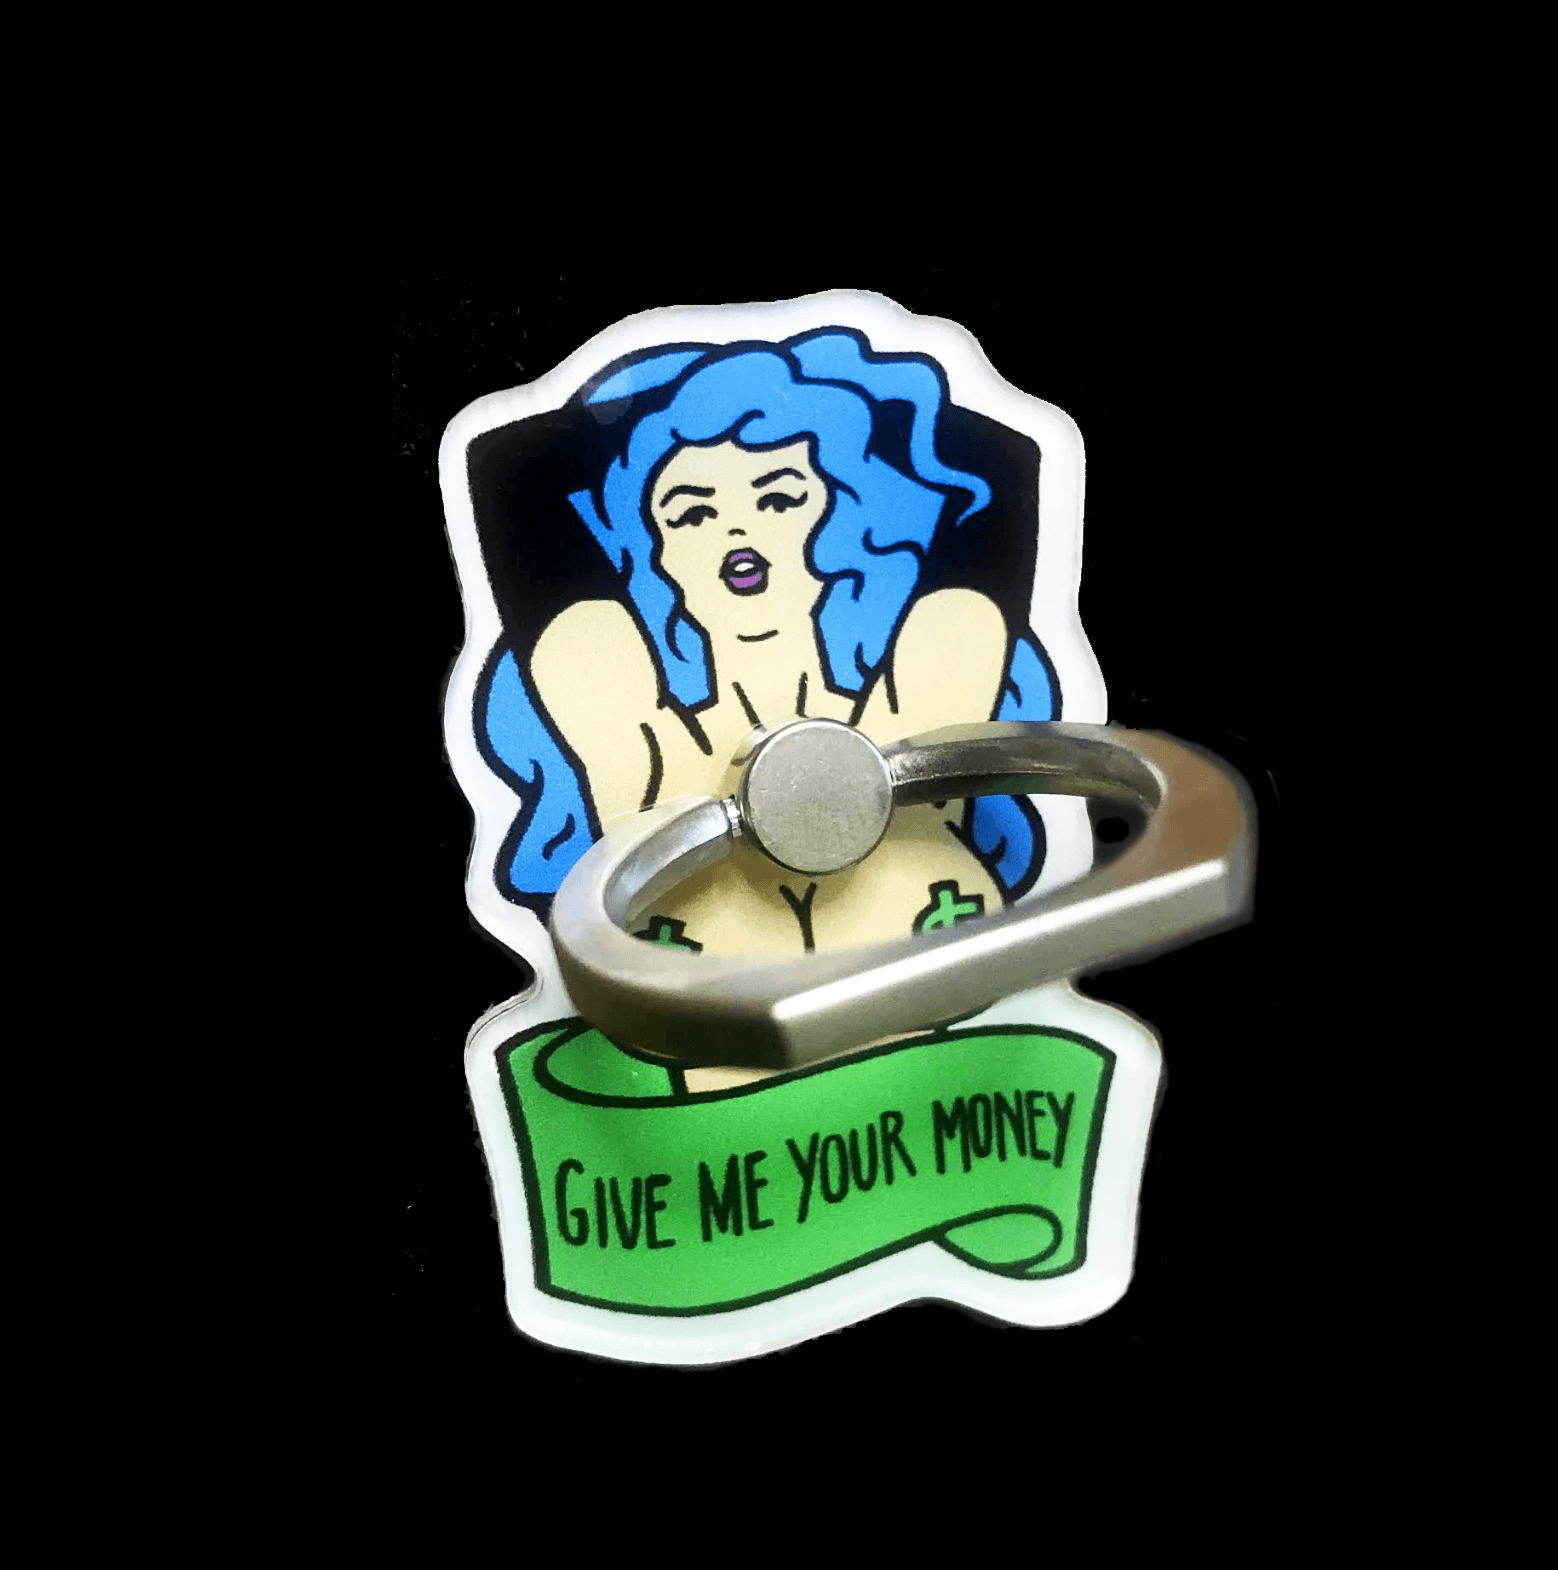 An acrylic phone ring / stand, featuring the bust of a topless, blue haired woman wearing green dollar sign pasties. Below her is a banner that says "GIVE ME YOUR MONEY".